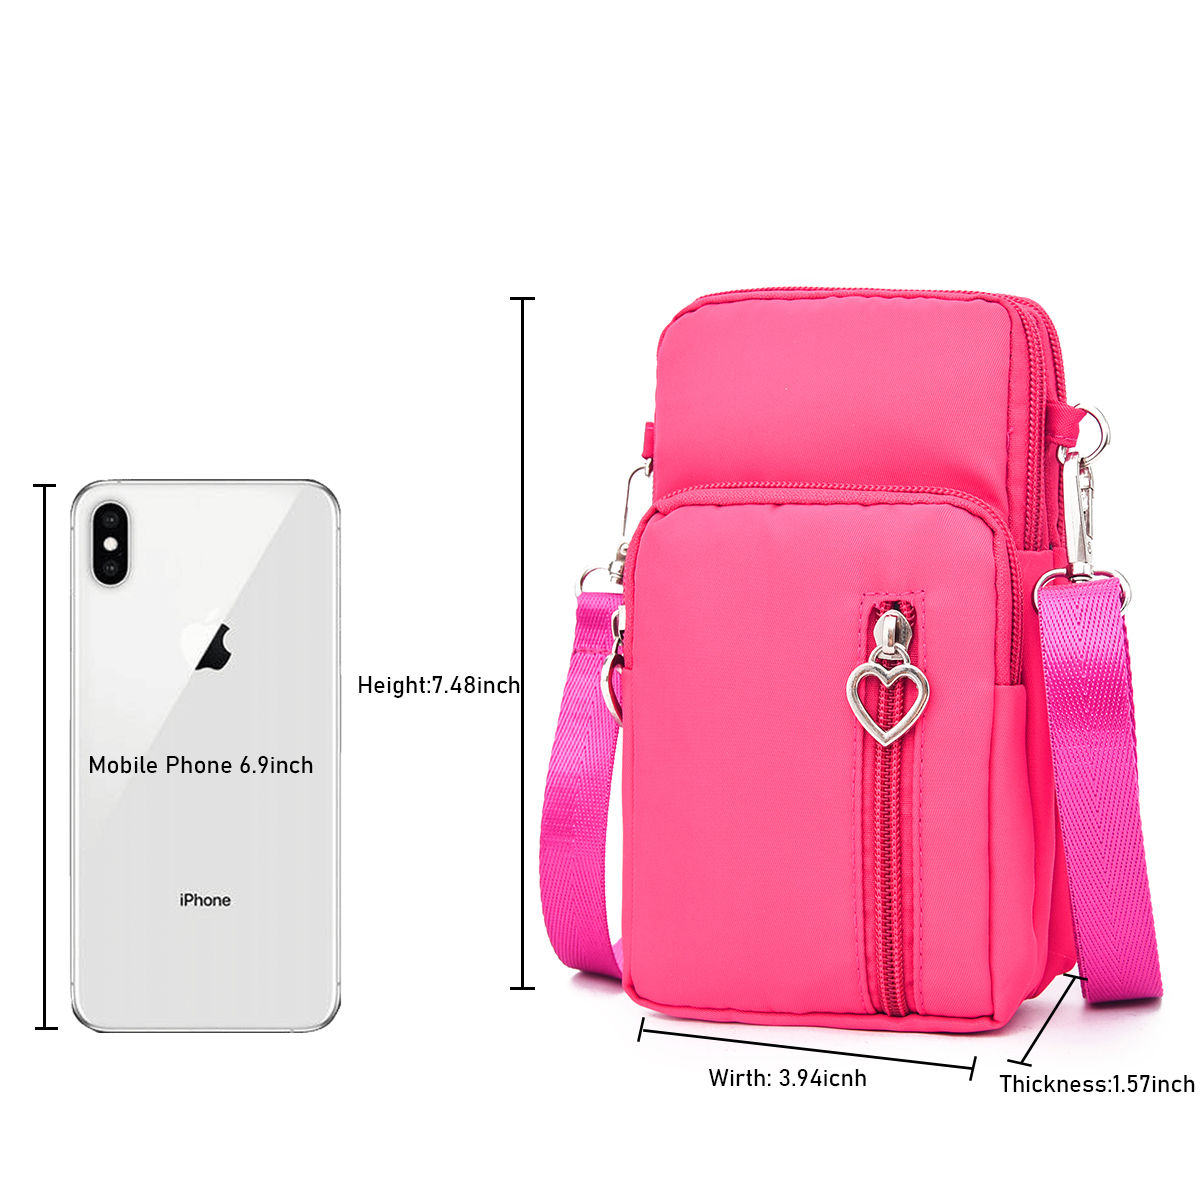 S7ae5b90f33b14c2db57151768d4ada31f Universal Mobile Phone Bag For Samsung/iPhone/Huawei/HTC/LG Arm Shoulder Phone Pouch